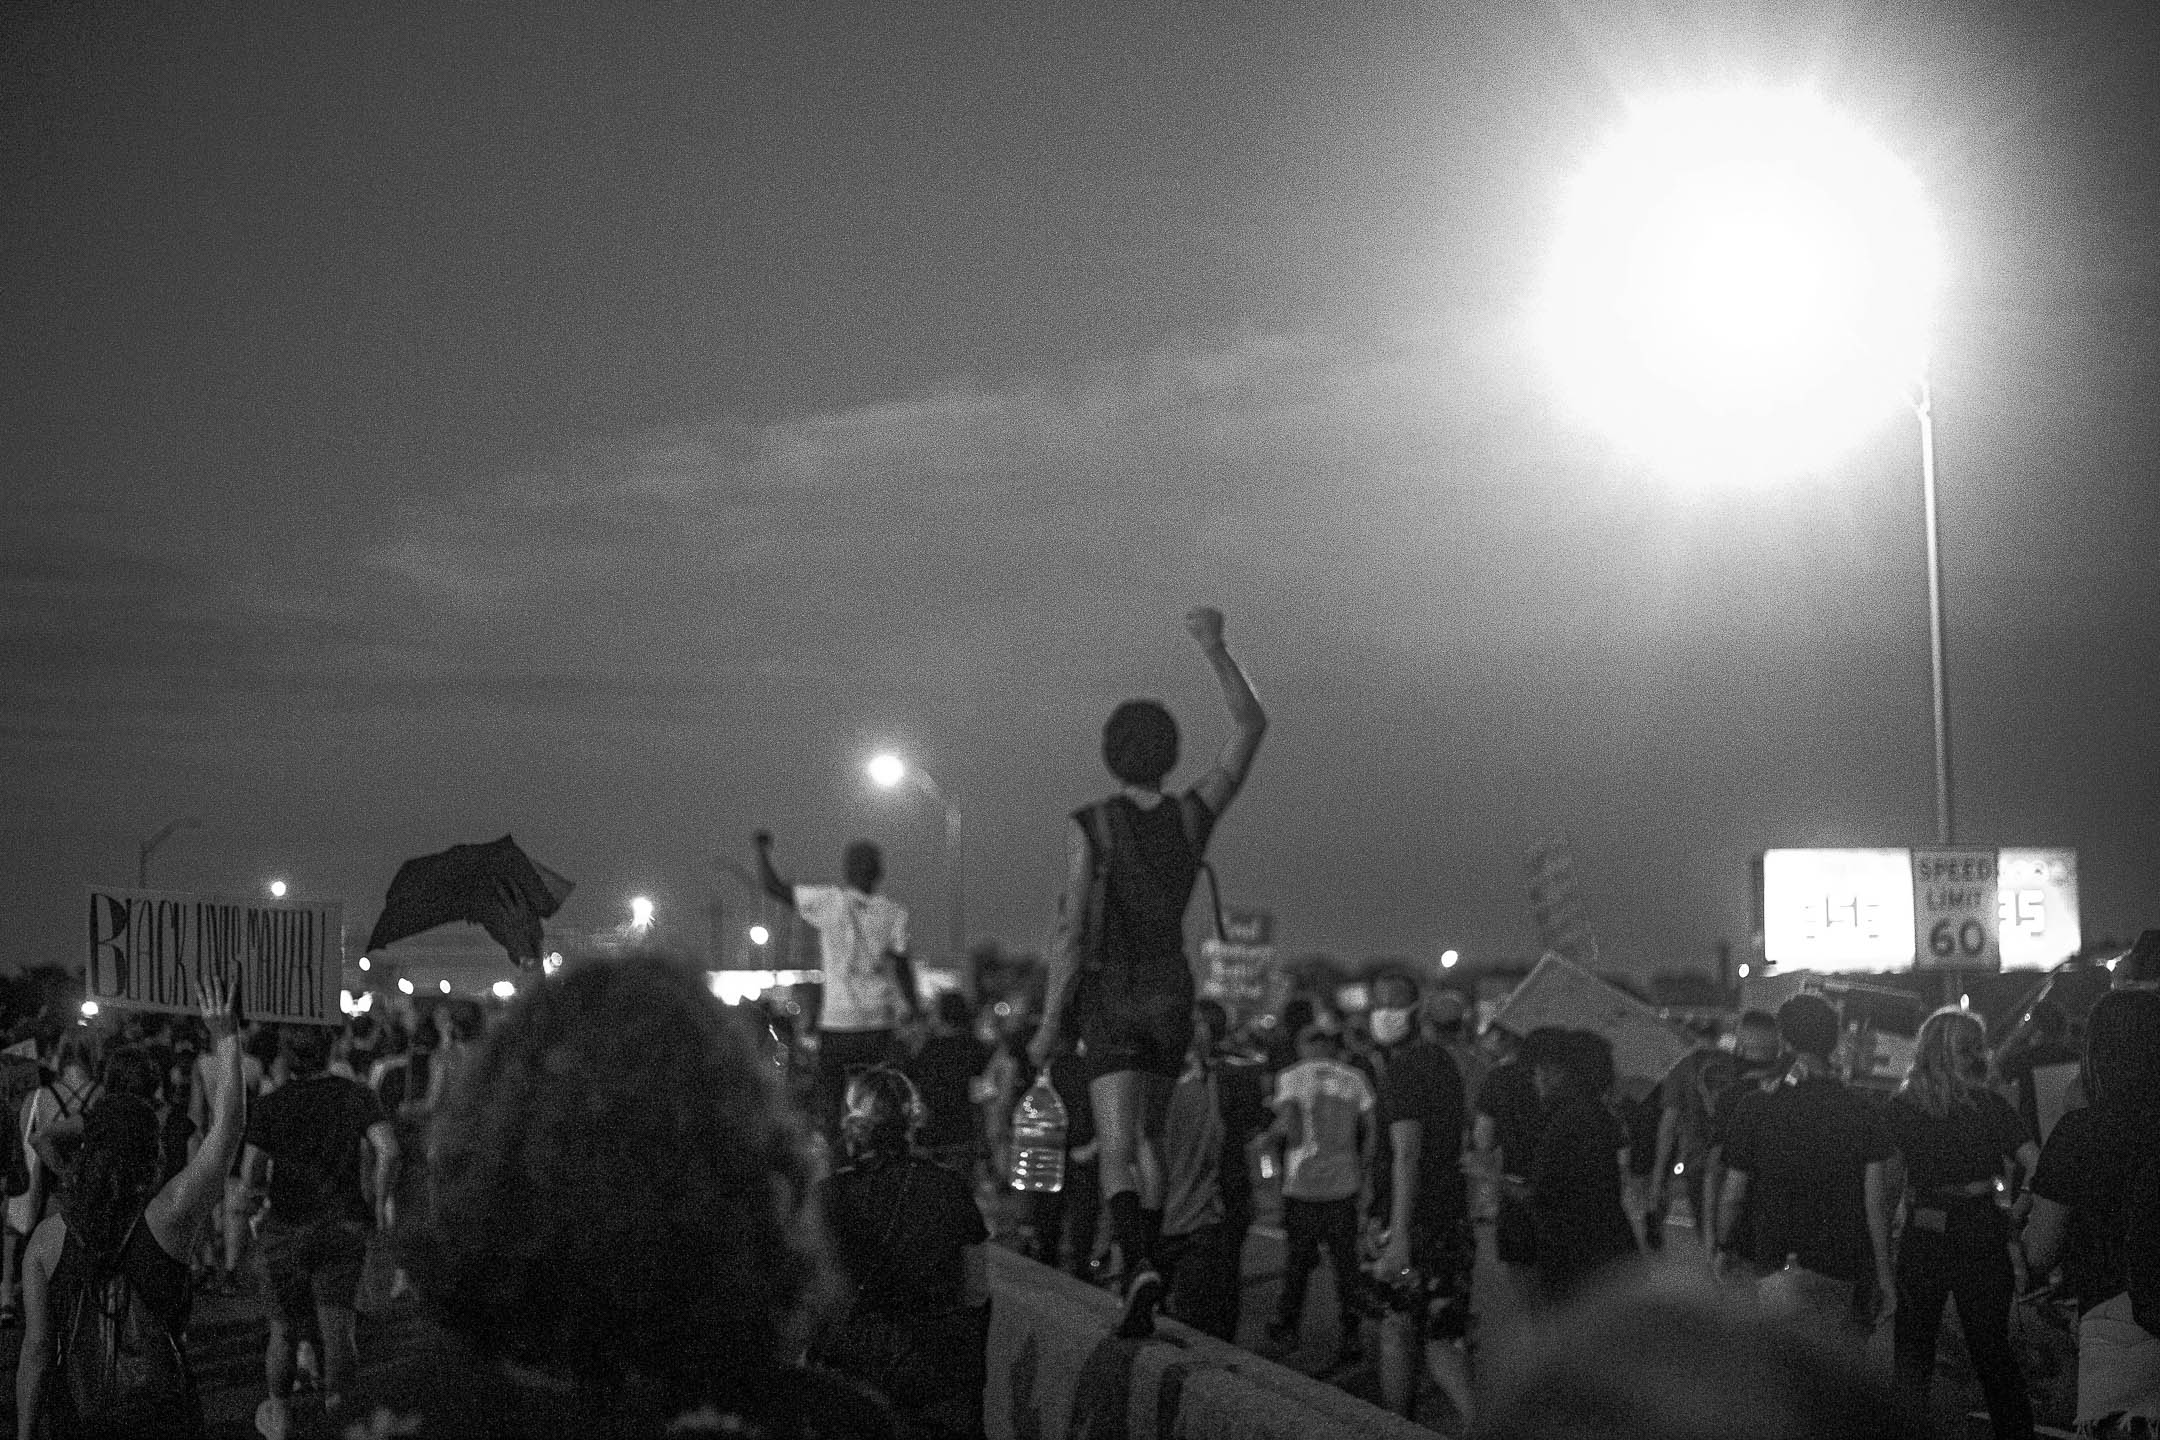 A black and white photo. Protesters walk together on a highway, taking up the width of the road; there are no cars to be seen. One protester, walking on the lane divider, raises their fist in the air and carries a water jug in their other hand. Another protester does the same, further down the road. A third protester raises a sign that says "Black Lives Matter" in capital letters. Light blazes from a streetlight in the corner of the scene.